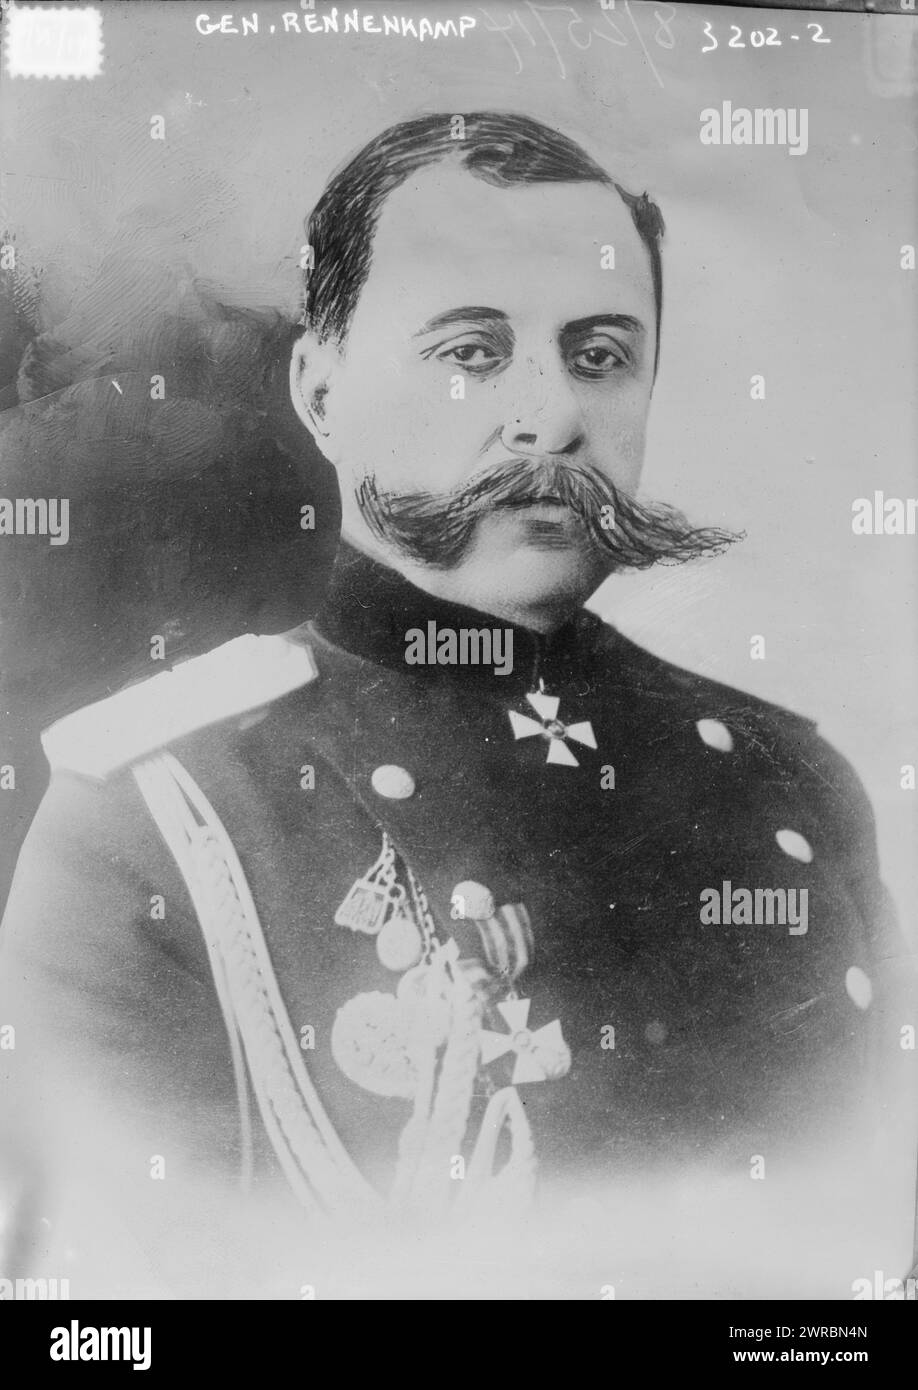 Gen. Rennenkamp, Photograph shows Paul von Rennenkampf (1854-1918), a Russian general who served in the Imperial Russian Army during World War I., 1914 Aug. 25 (date created or published by Bain), Glass negatives, 1 negative: glass Stock Photo